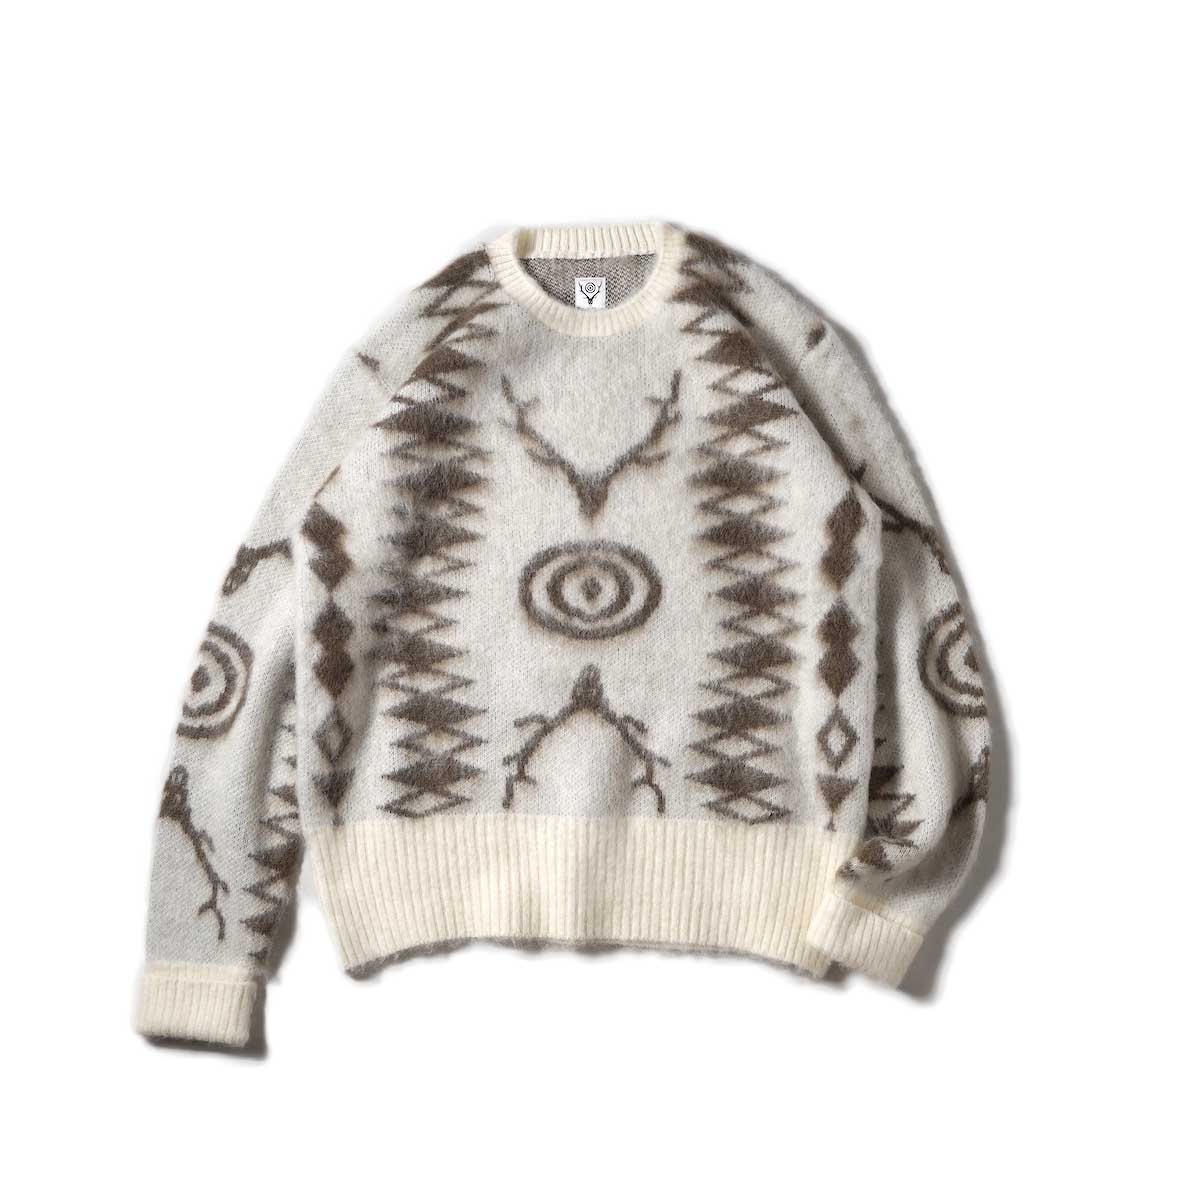 South2 West8 / Loose Fit Sweater - S2W8 Native (Off White)